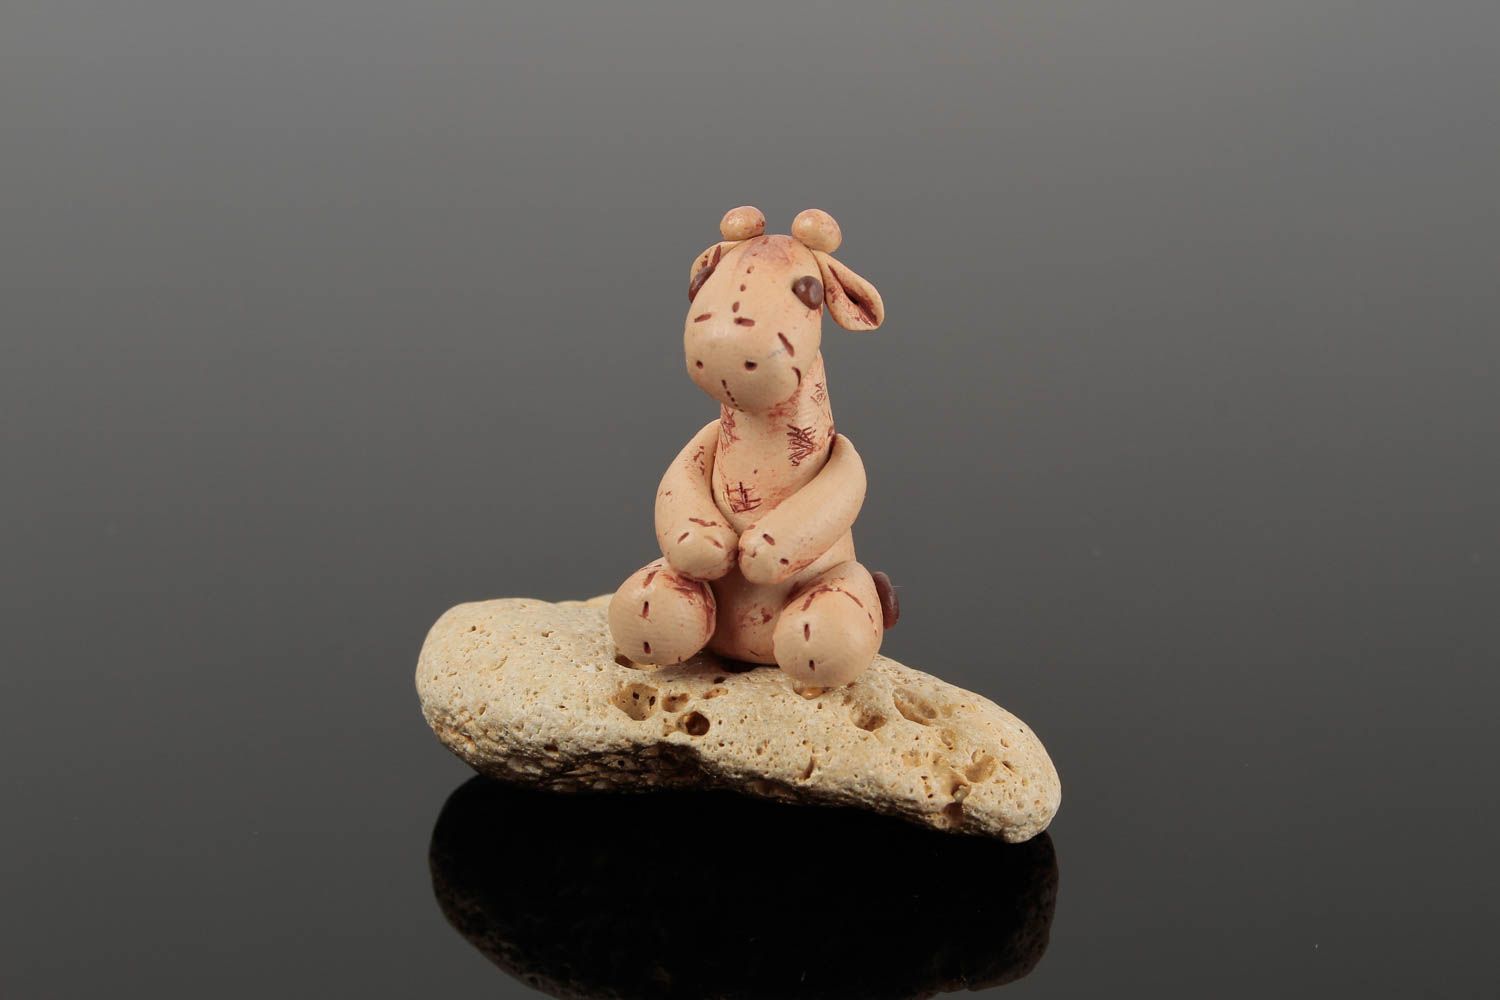 Handmade plastic figurine polymer clay ideas small gifts decorative use only photo 2